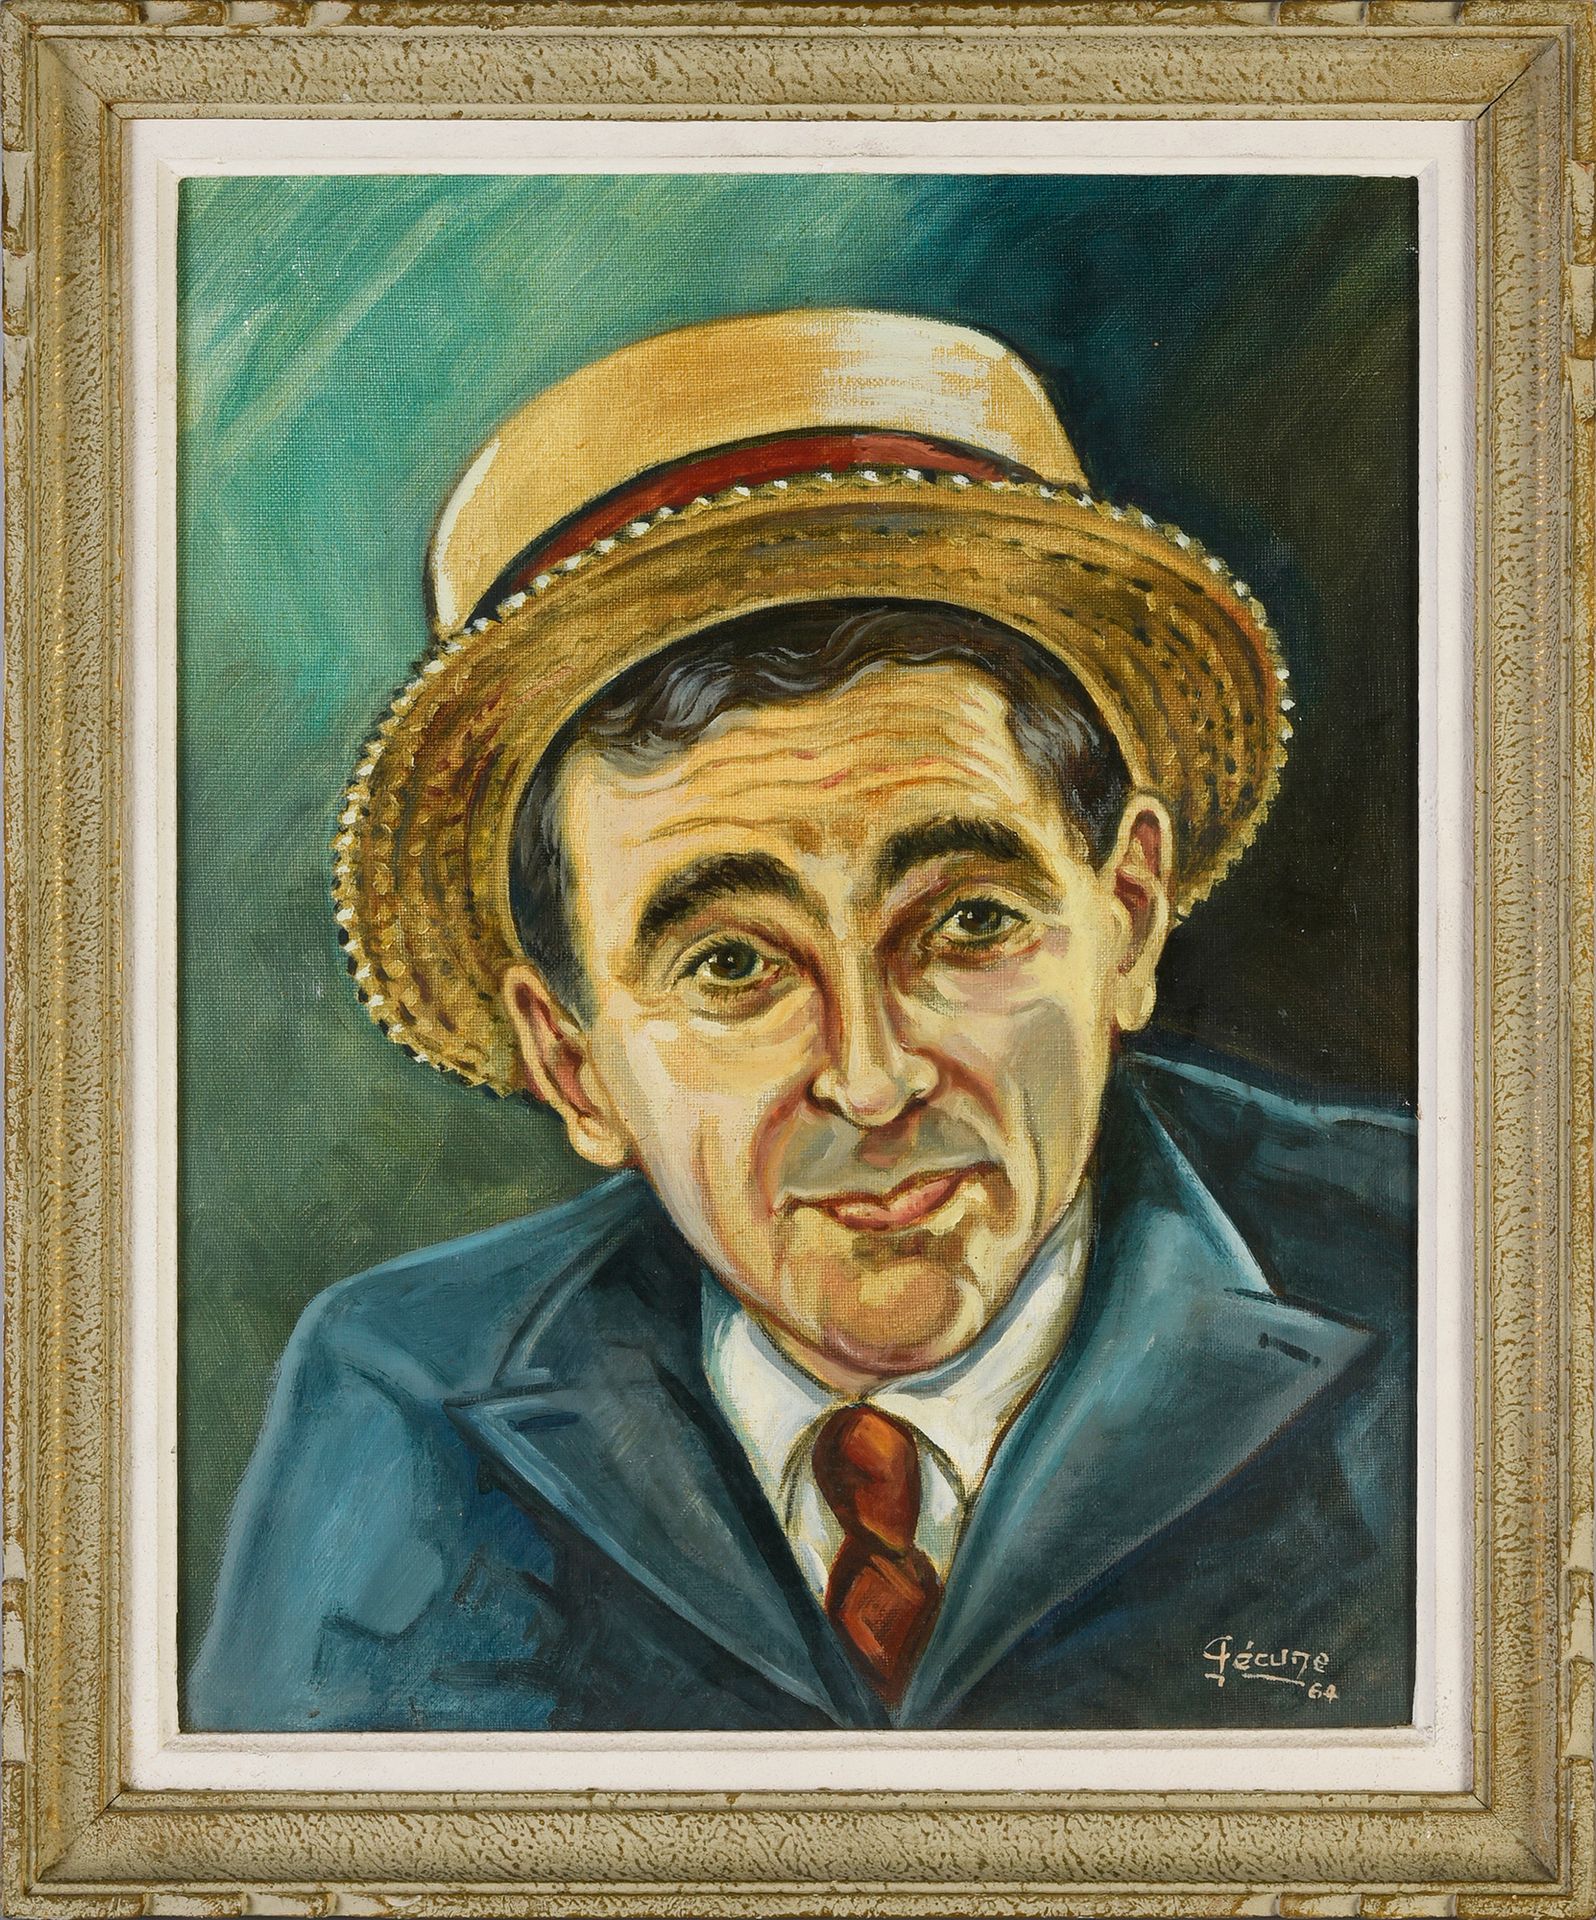 Null CHARLES AZNAVOUR (1924/2018) : 1 painting on canvas, painted by Pécune in 1&hellip;